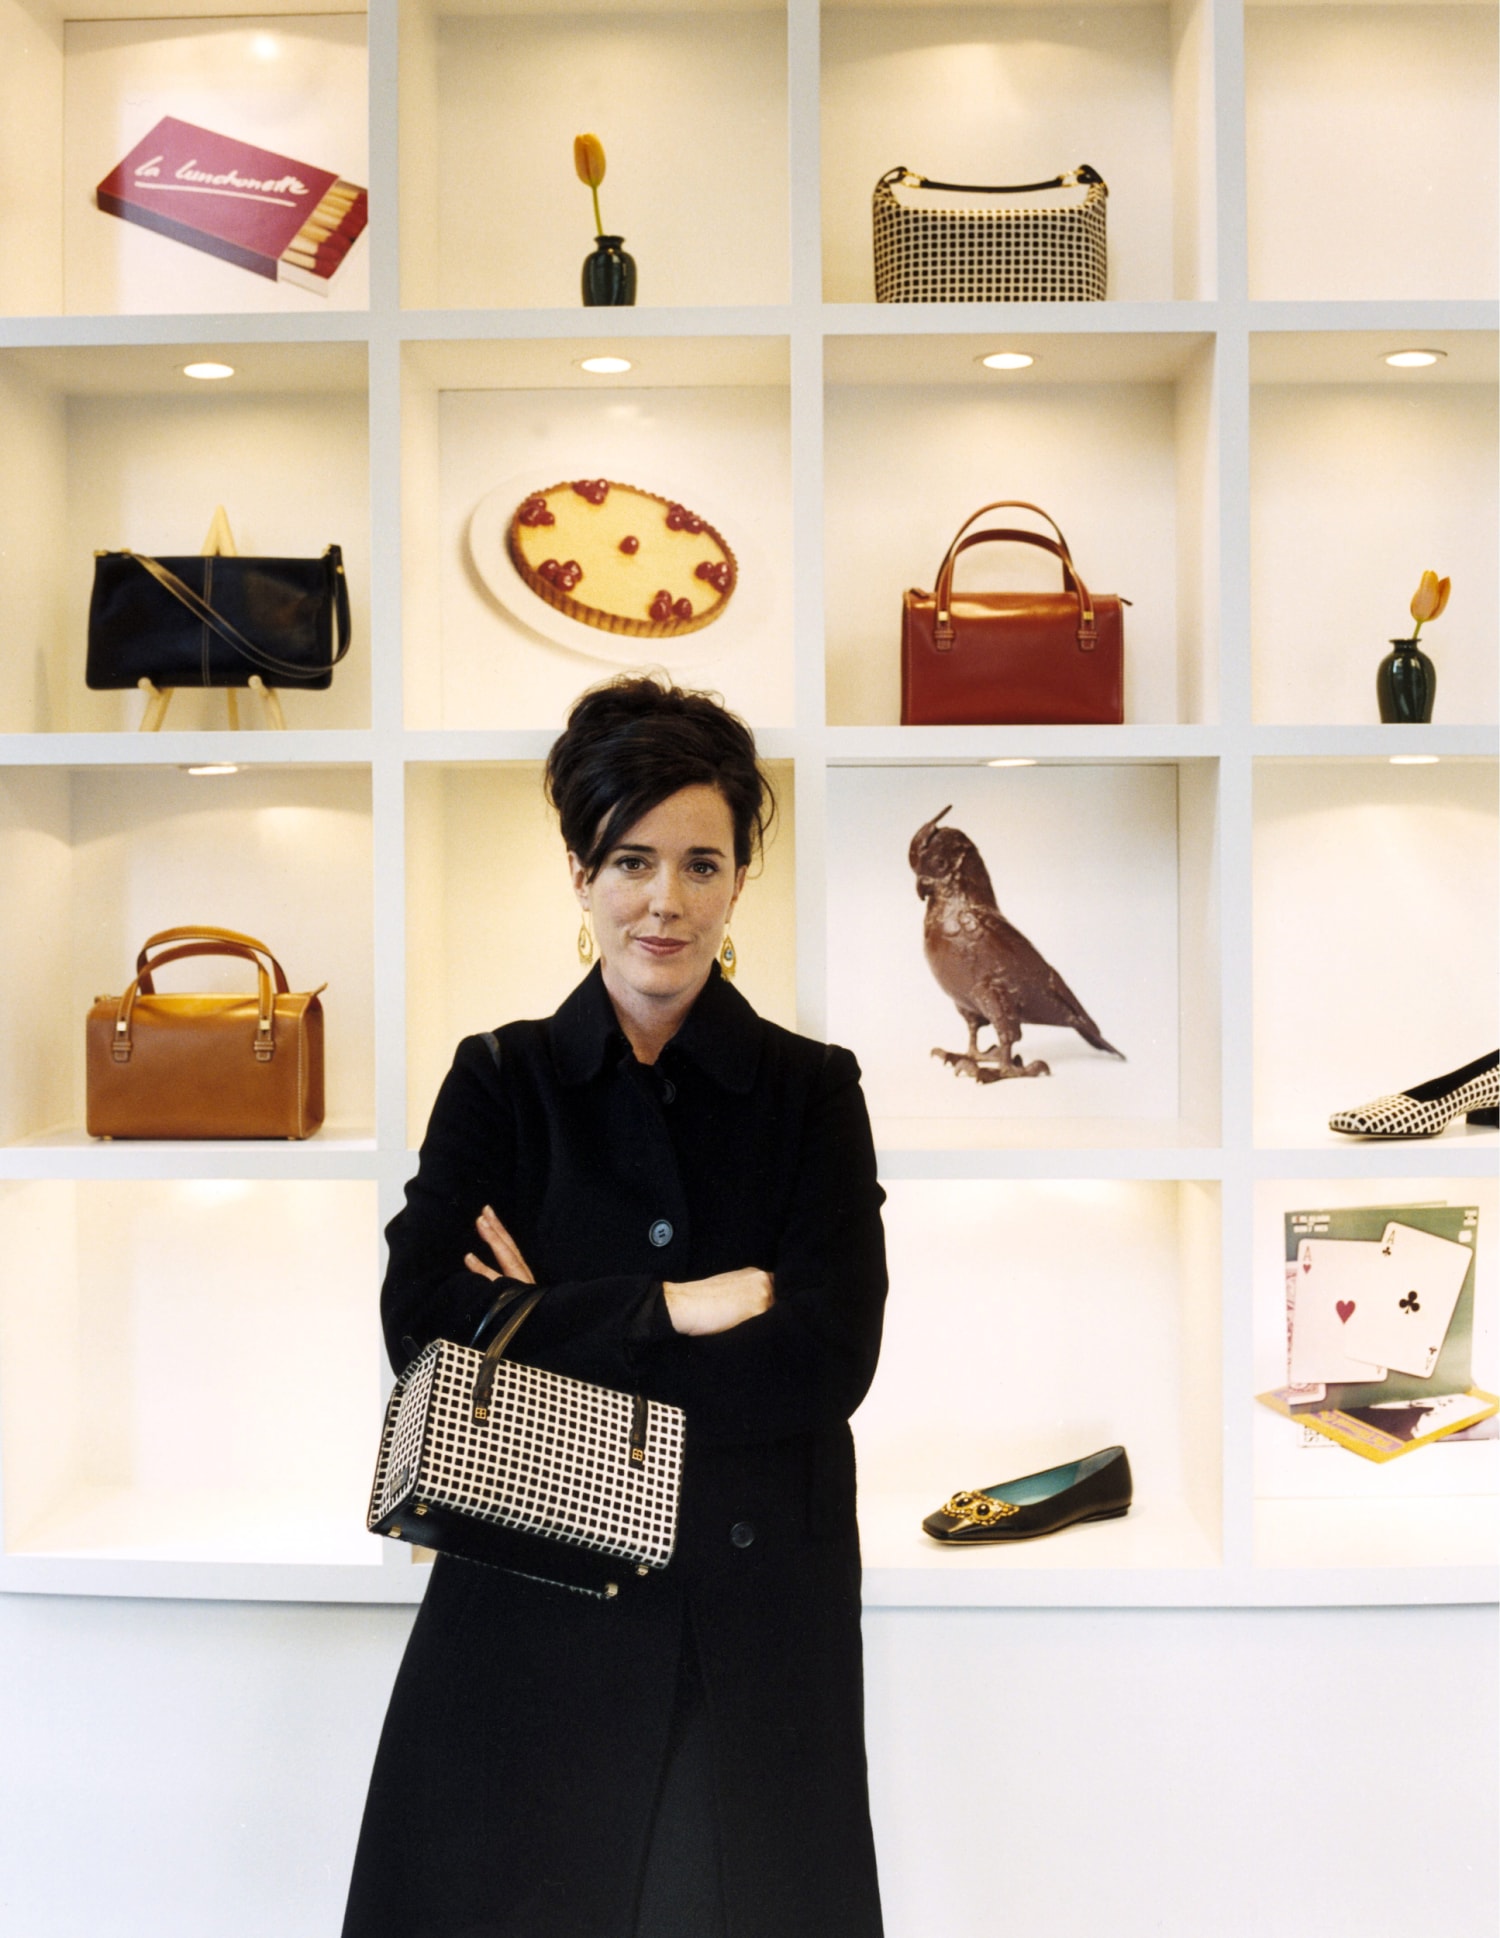 Everything you need to know about: Kate Spade